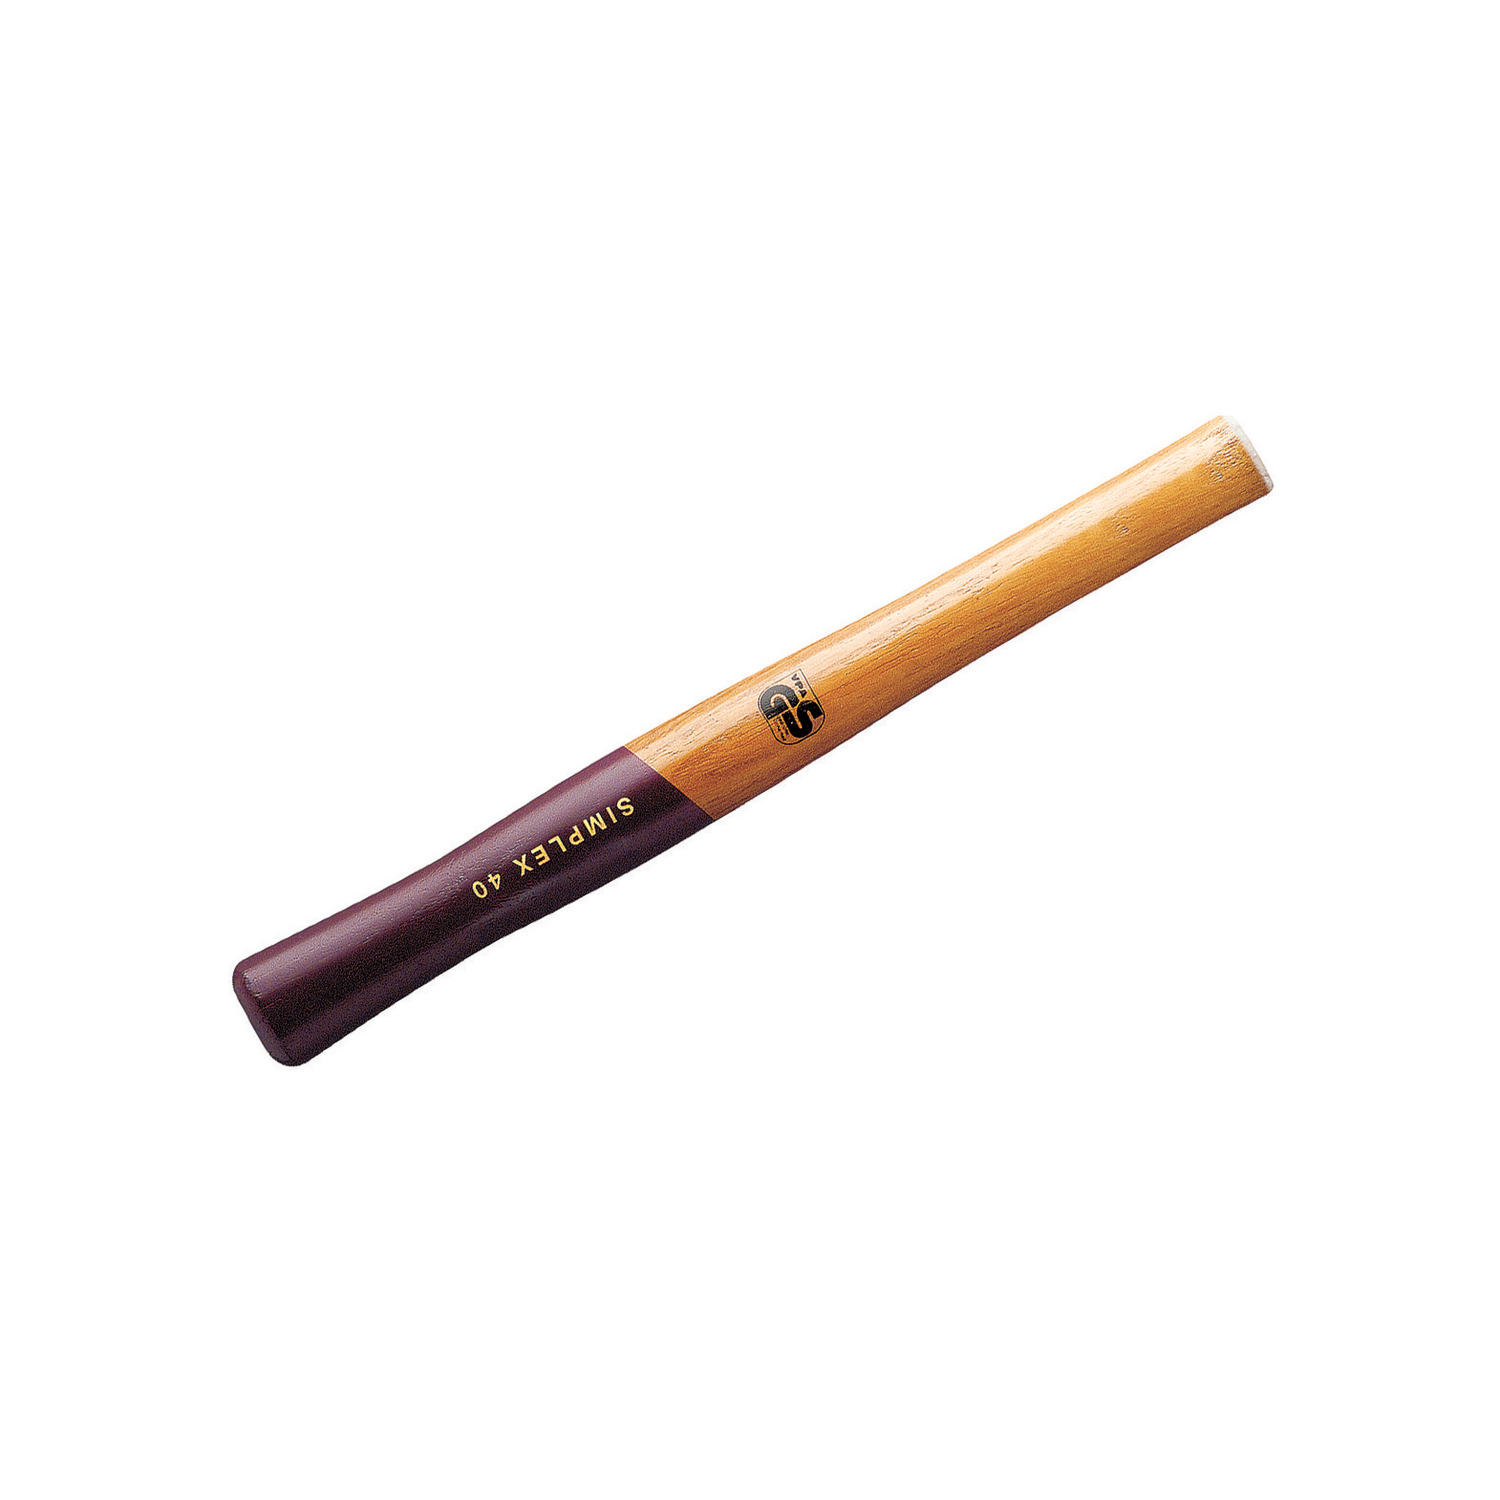 Product 98023, Simplex Mallets wooden handle for no. 98021 / 